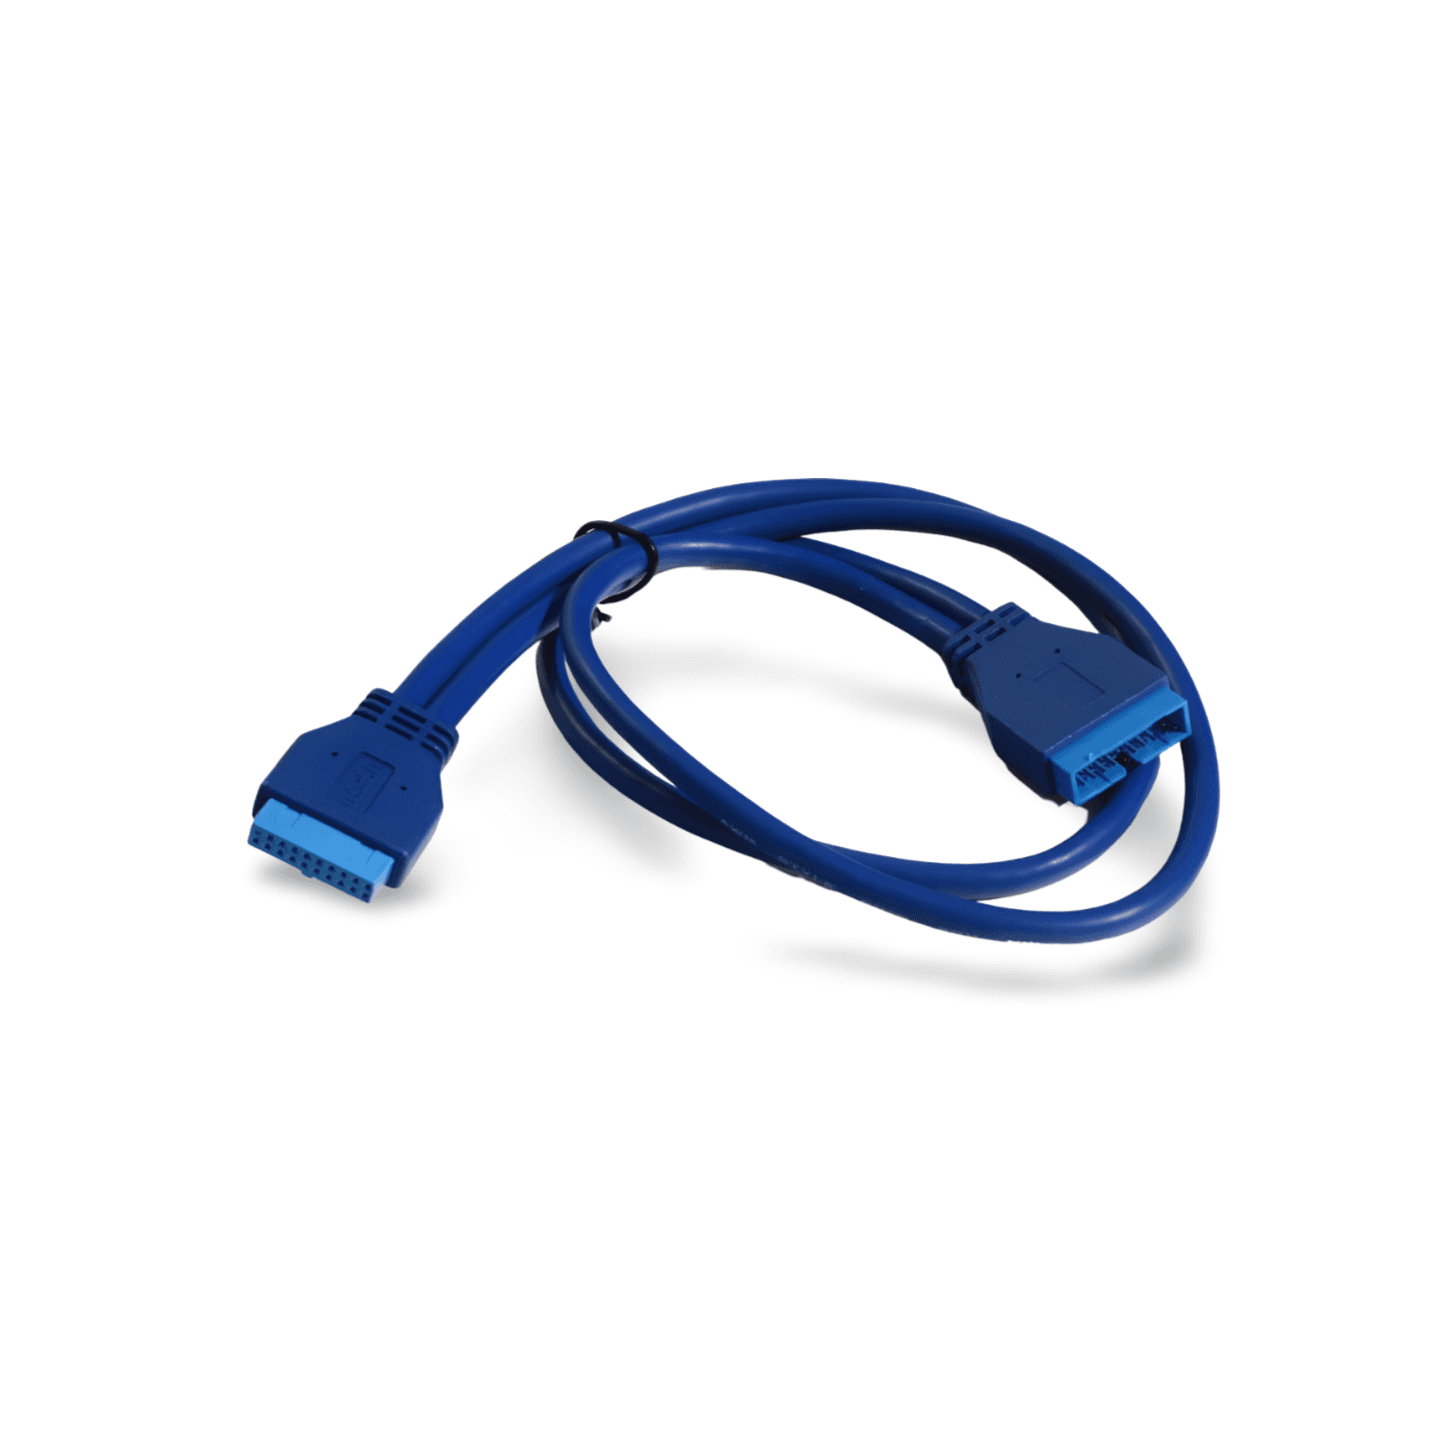 1 8ft USB 3.0 Header Cable 20 Pin Male to 20 Pin Female Extension Adapter blue